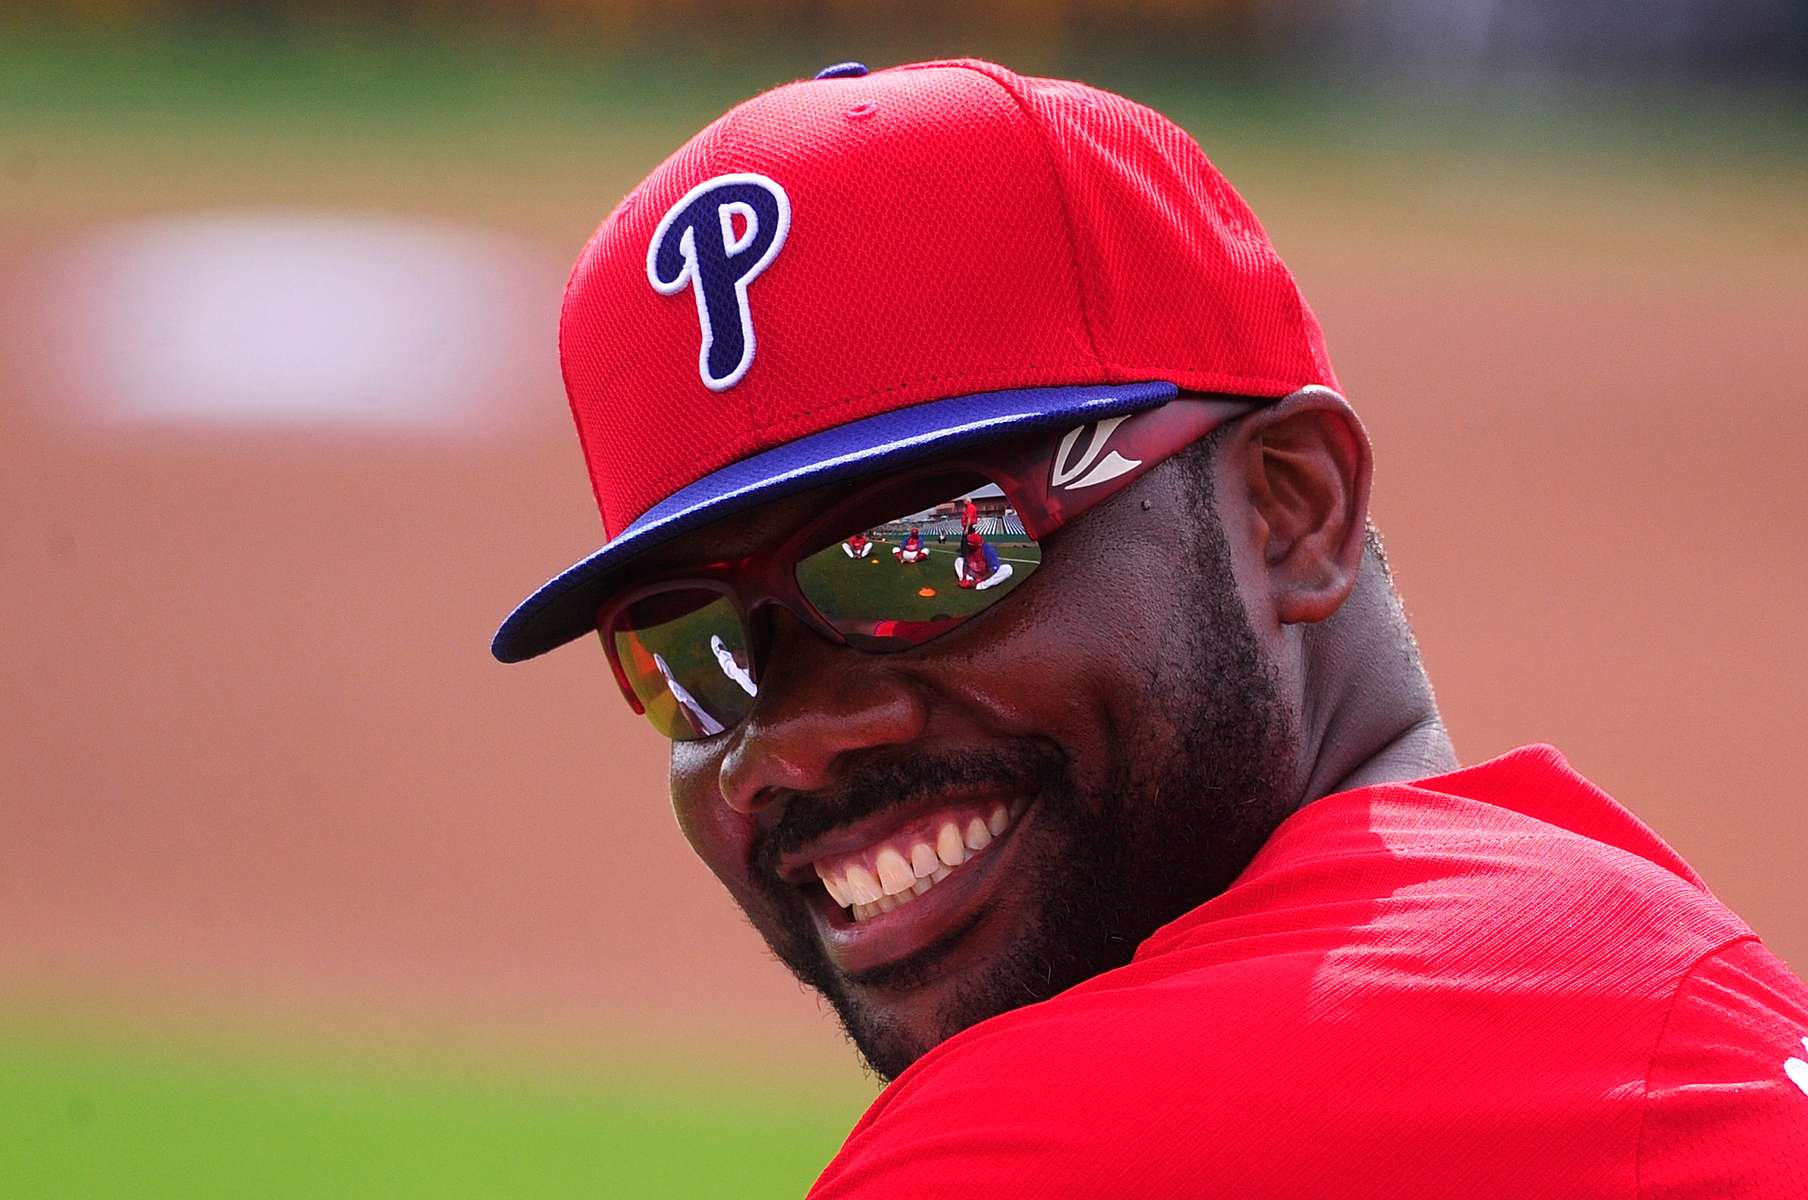 Philadelphia Phillies first baseman Ryan Howard stretches while his teammates are reflected in his glasses before the Toronto Blue Jays play the Phillies in a spring training exhibition game at Bright House Field on Wednesday, February 26, 2014 in Clearwater, Fla.